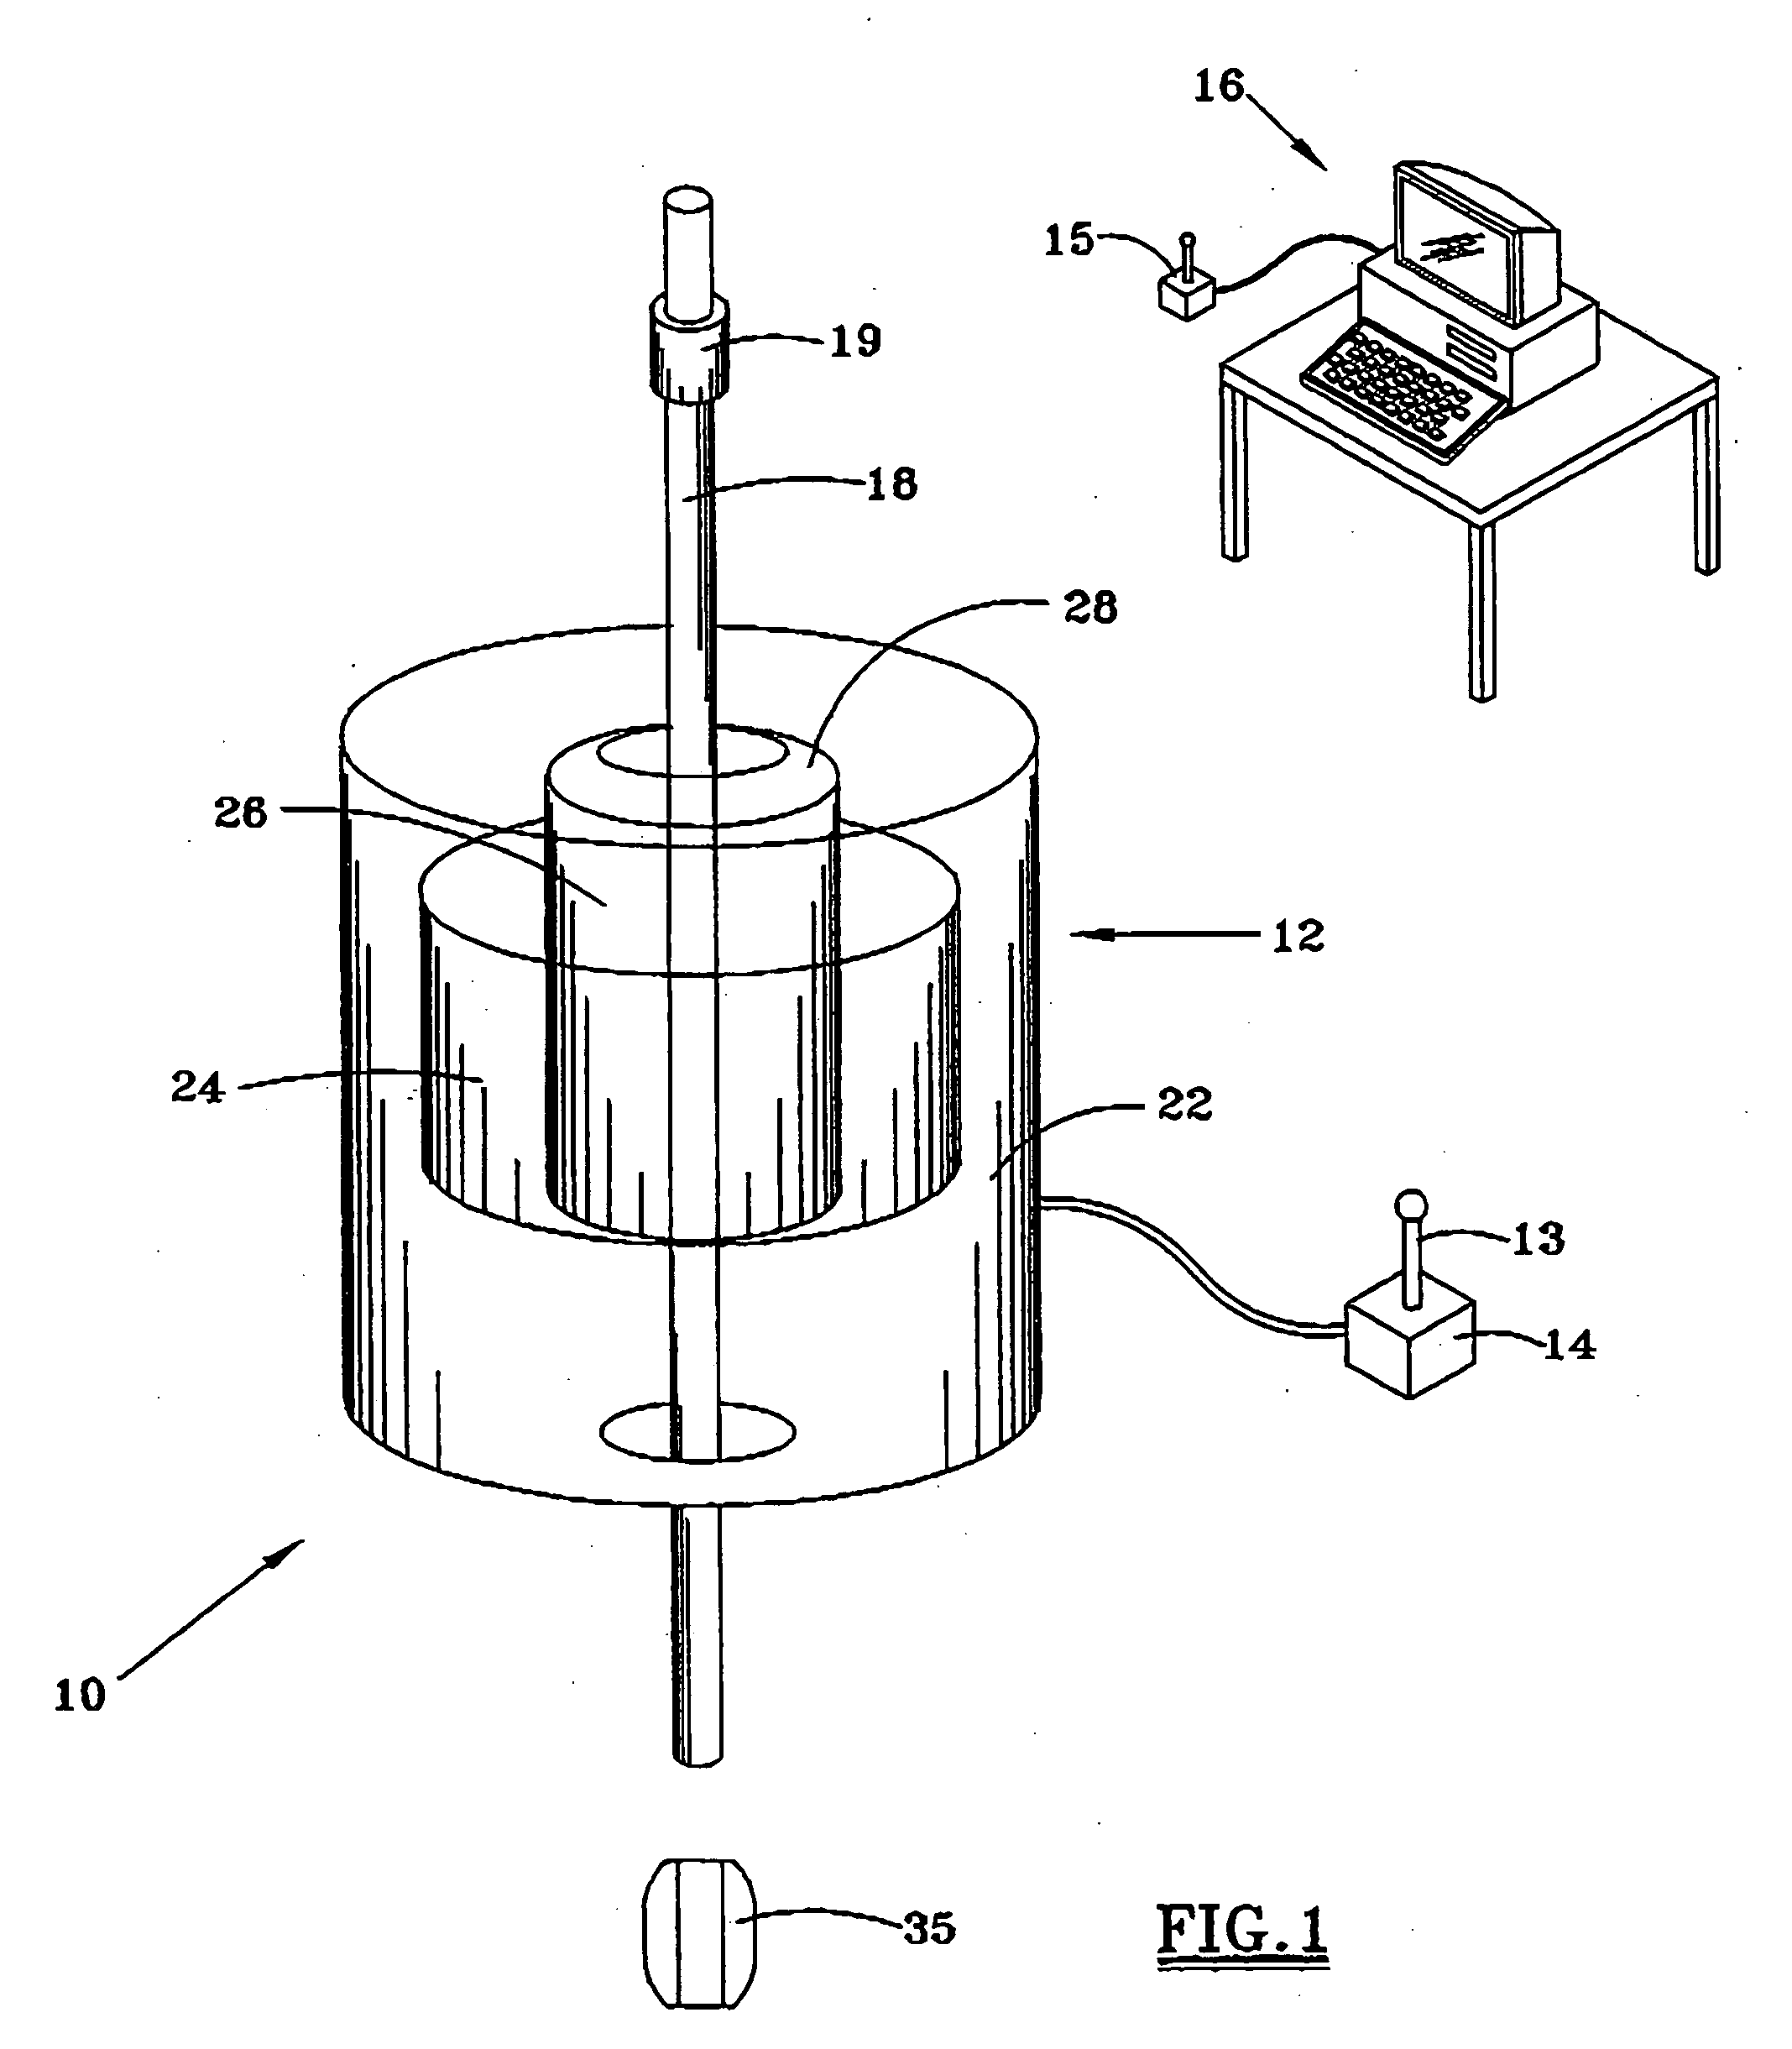 Wellbore evaluation system and method